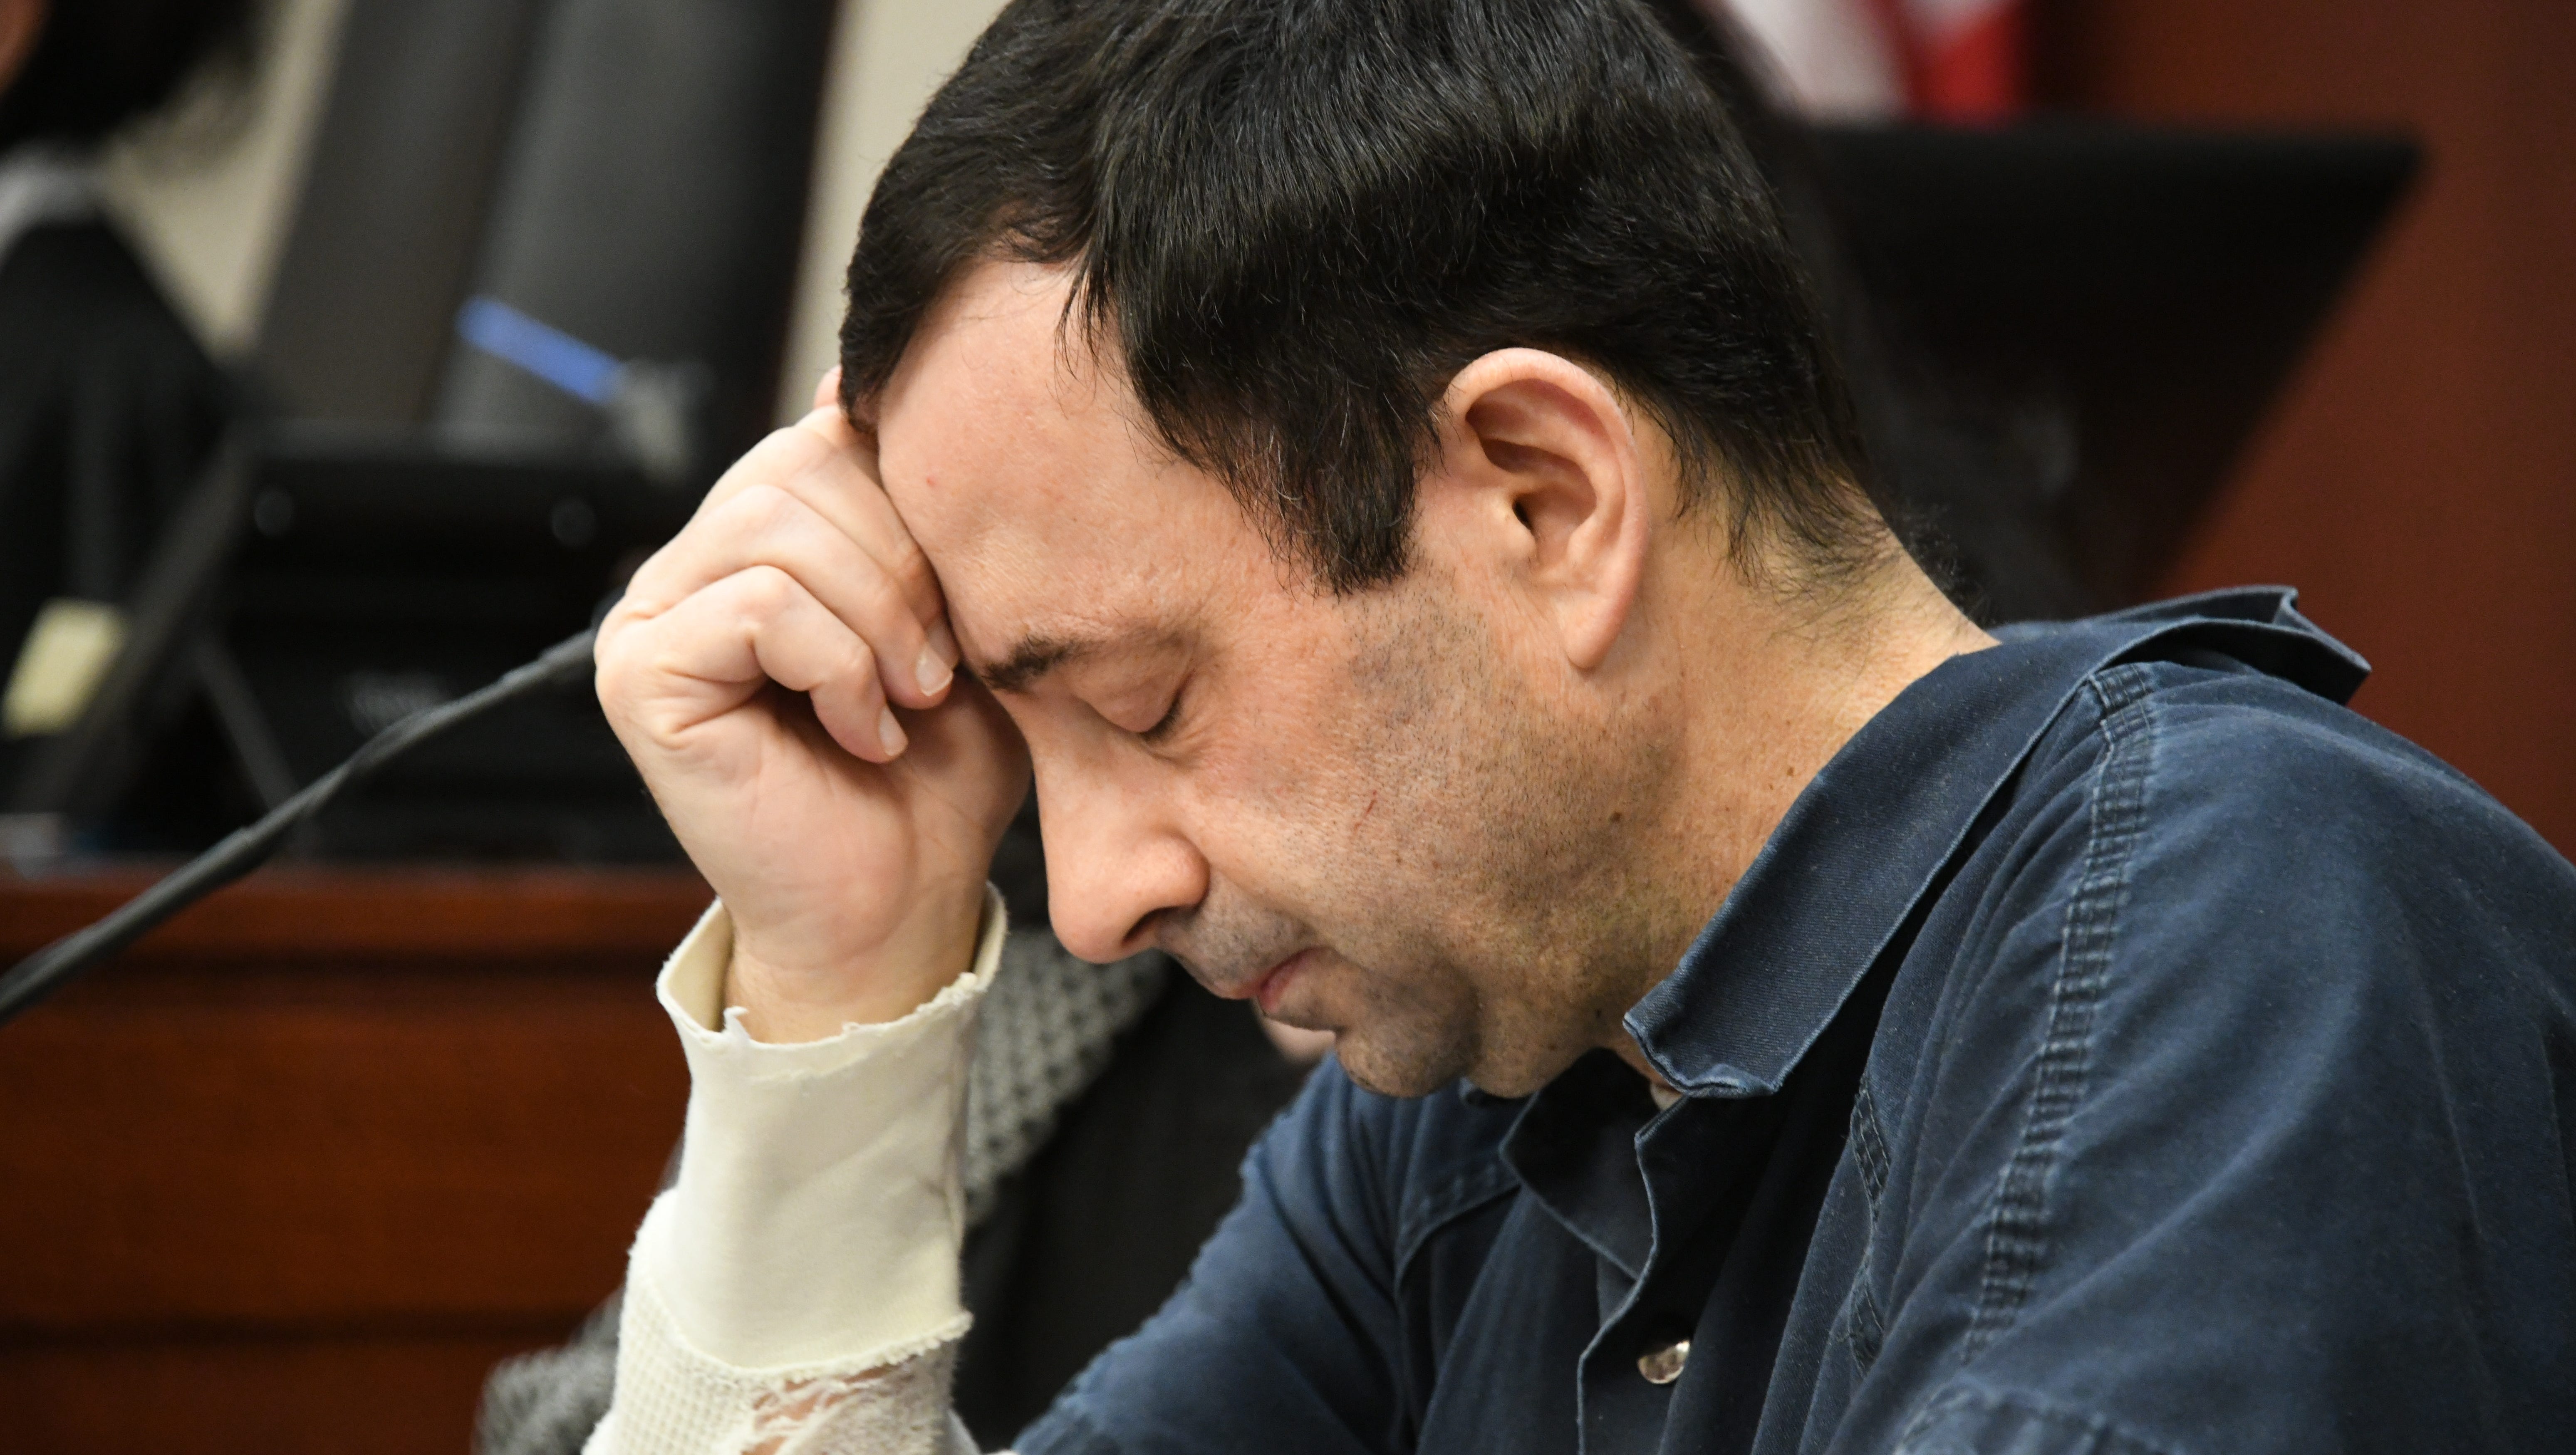 2018: Nassar is forced to listen to days of victims' impact statements in court, as they tell their stories and the lasting effect his crimes have had on them. Nassar faces sentencing in two courts on 10 counts of criminal sexual conduct. In the first case, prosecutors request a sentence of 40 to 125 years.